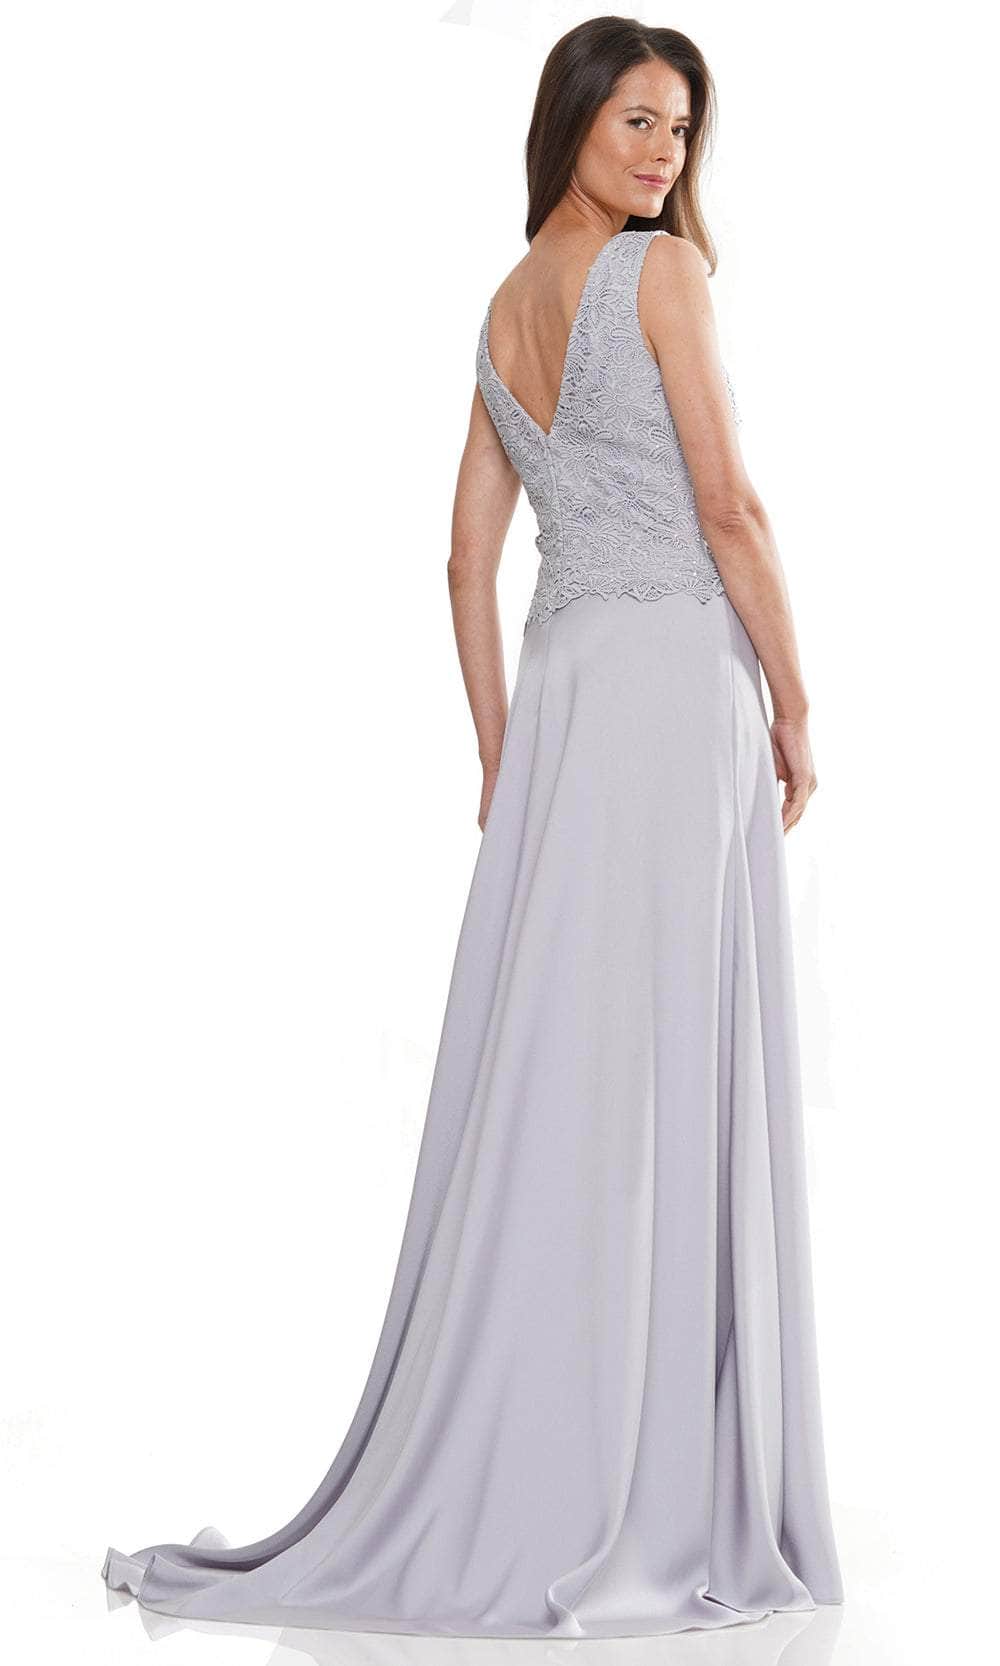 Rina di Montella RD2973 - Sleeveless Embellished Formal Gown Special Occasion Dress